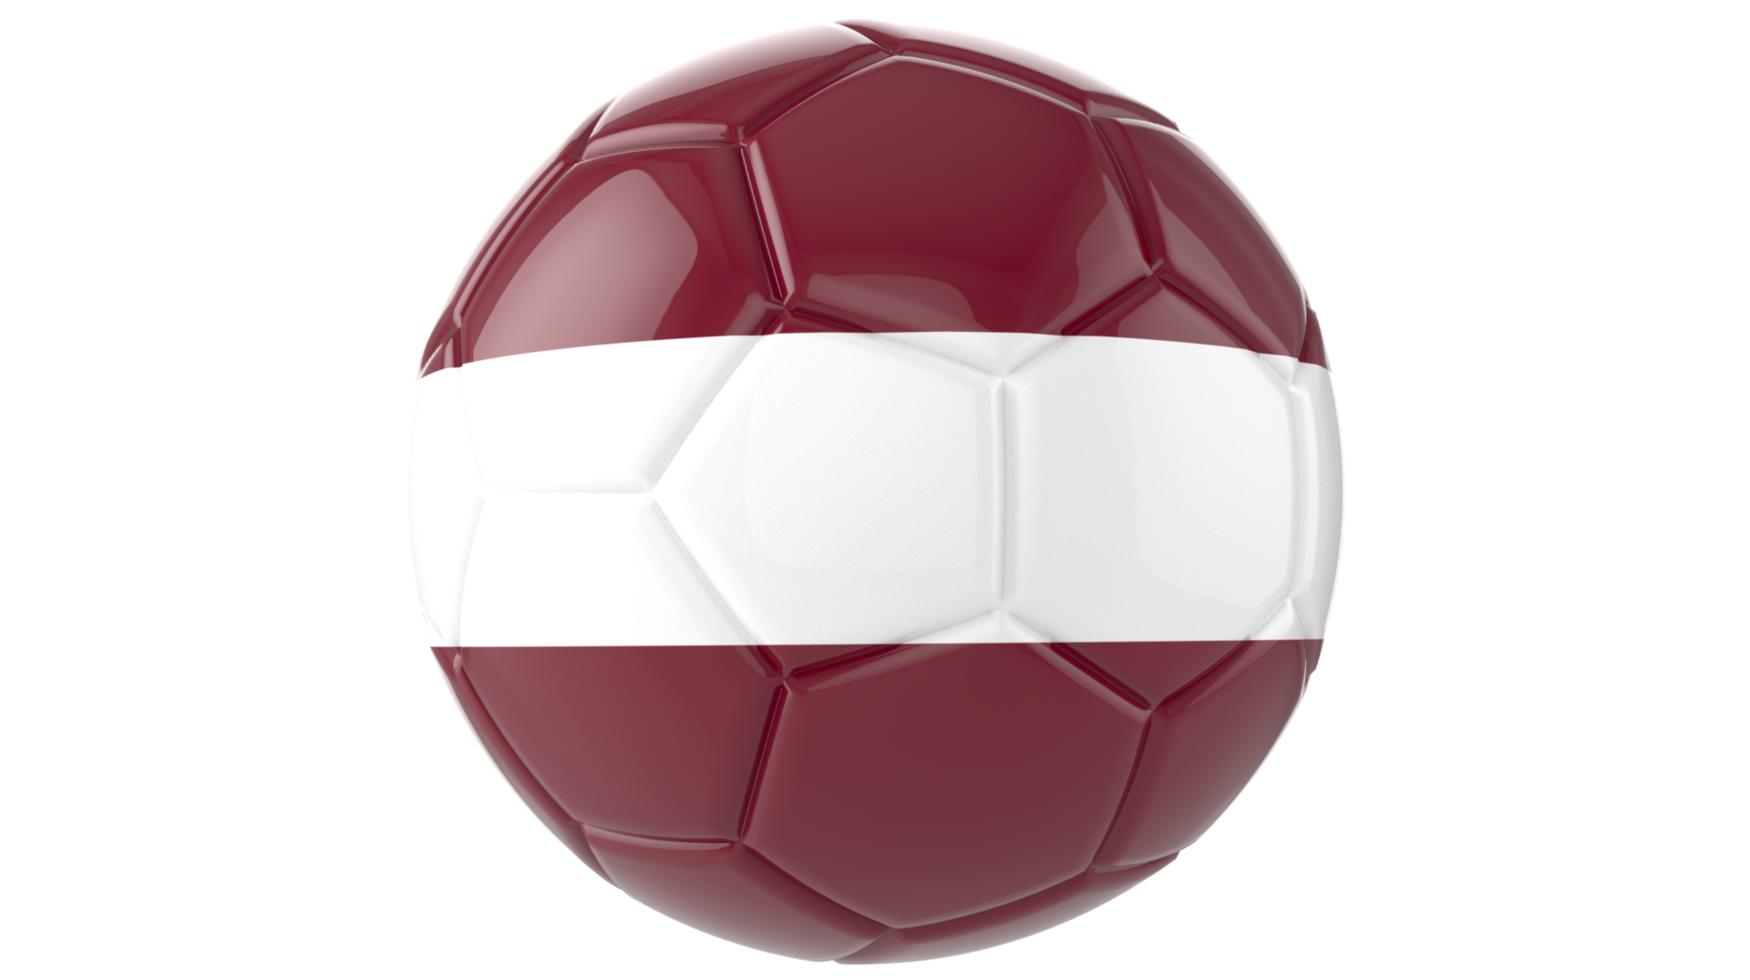 3d realistic soccer ball with the flag of  Latvia on it isolated on transparent PNG background